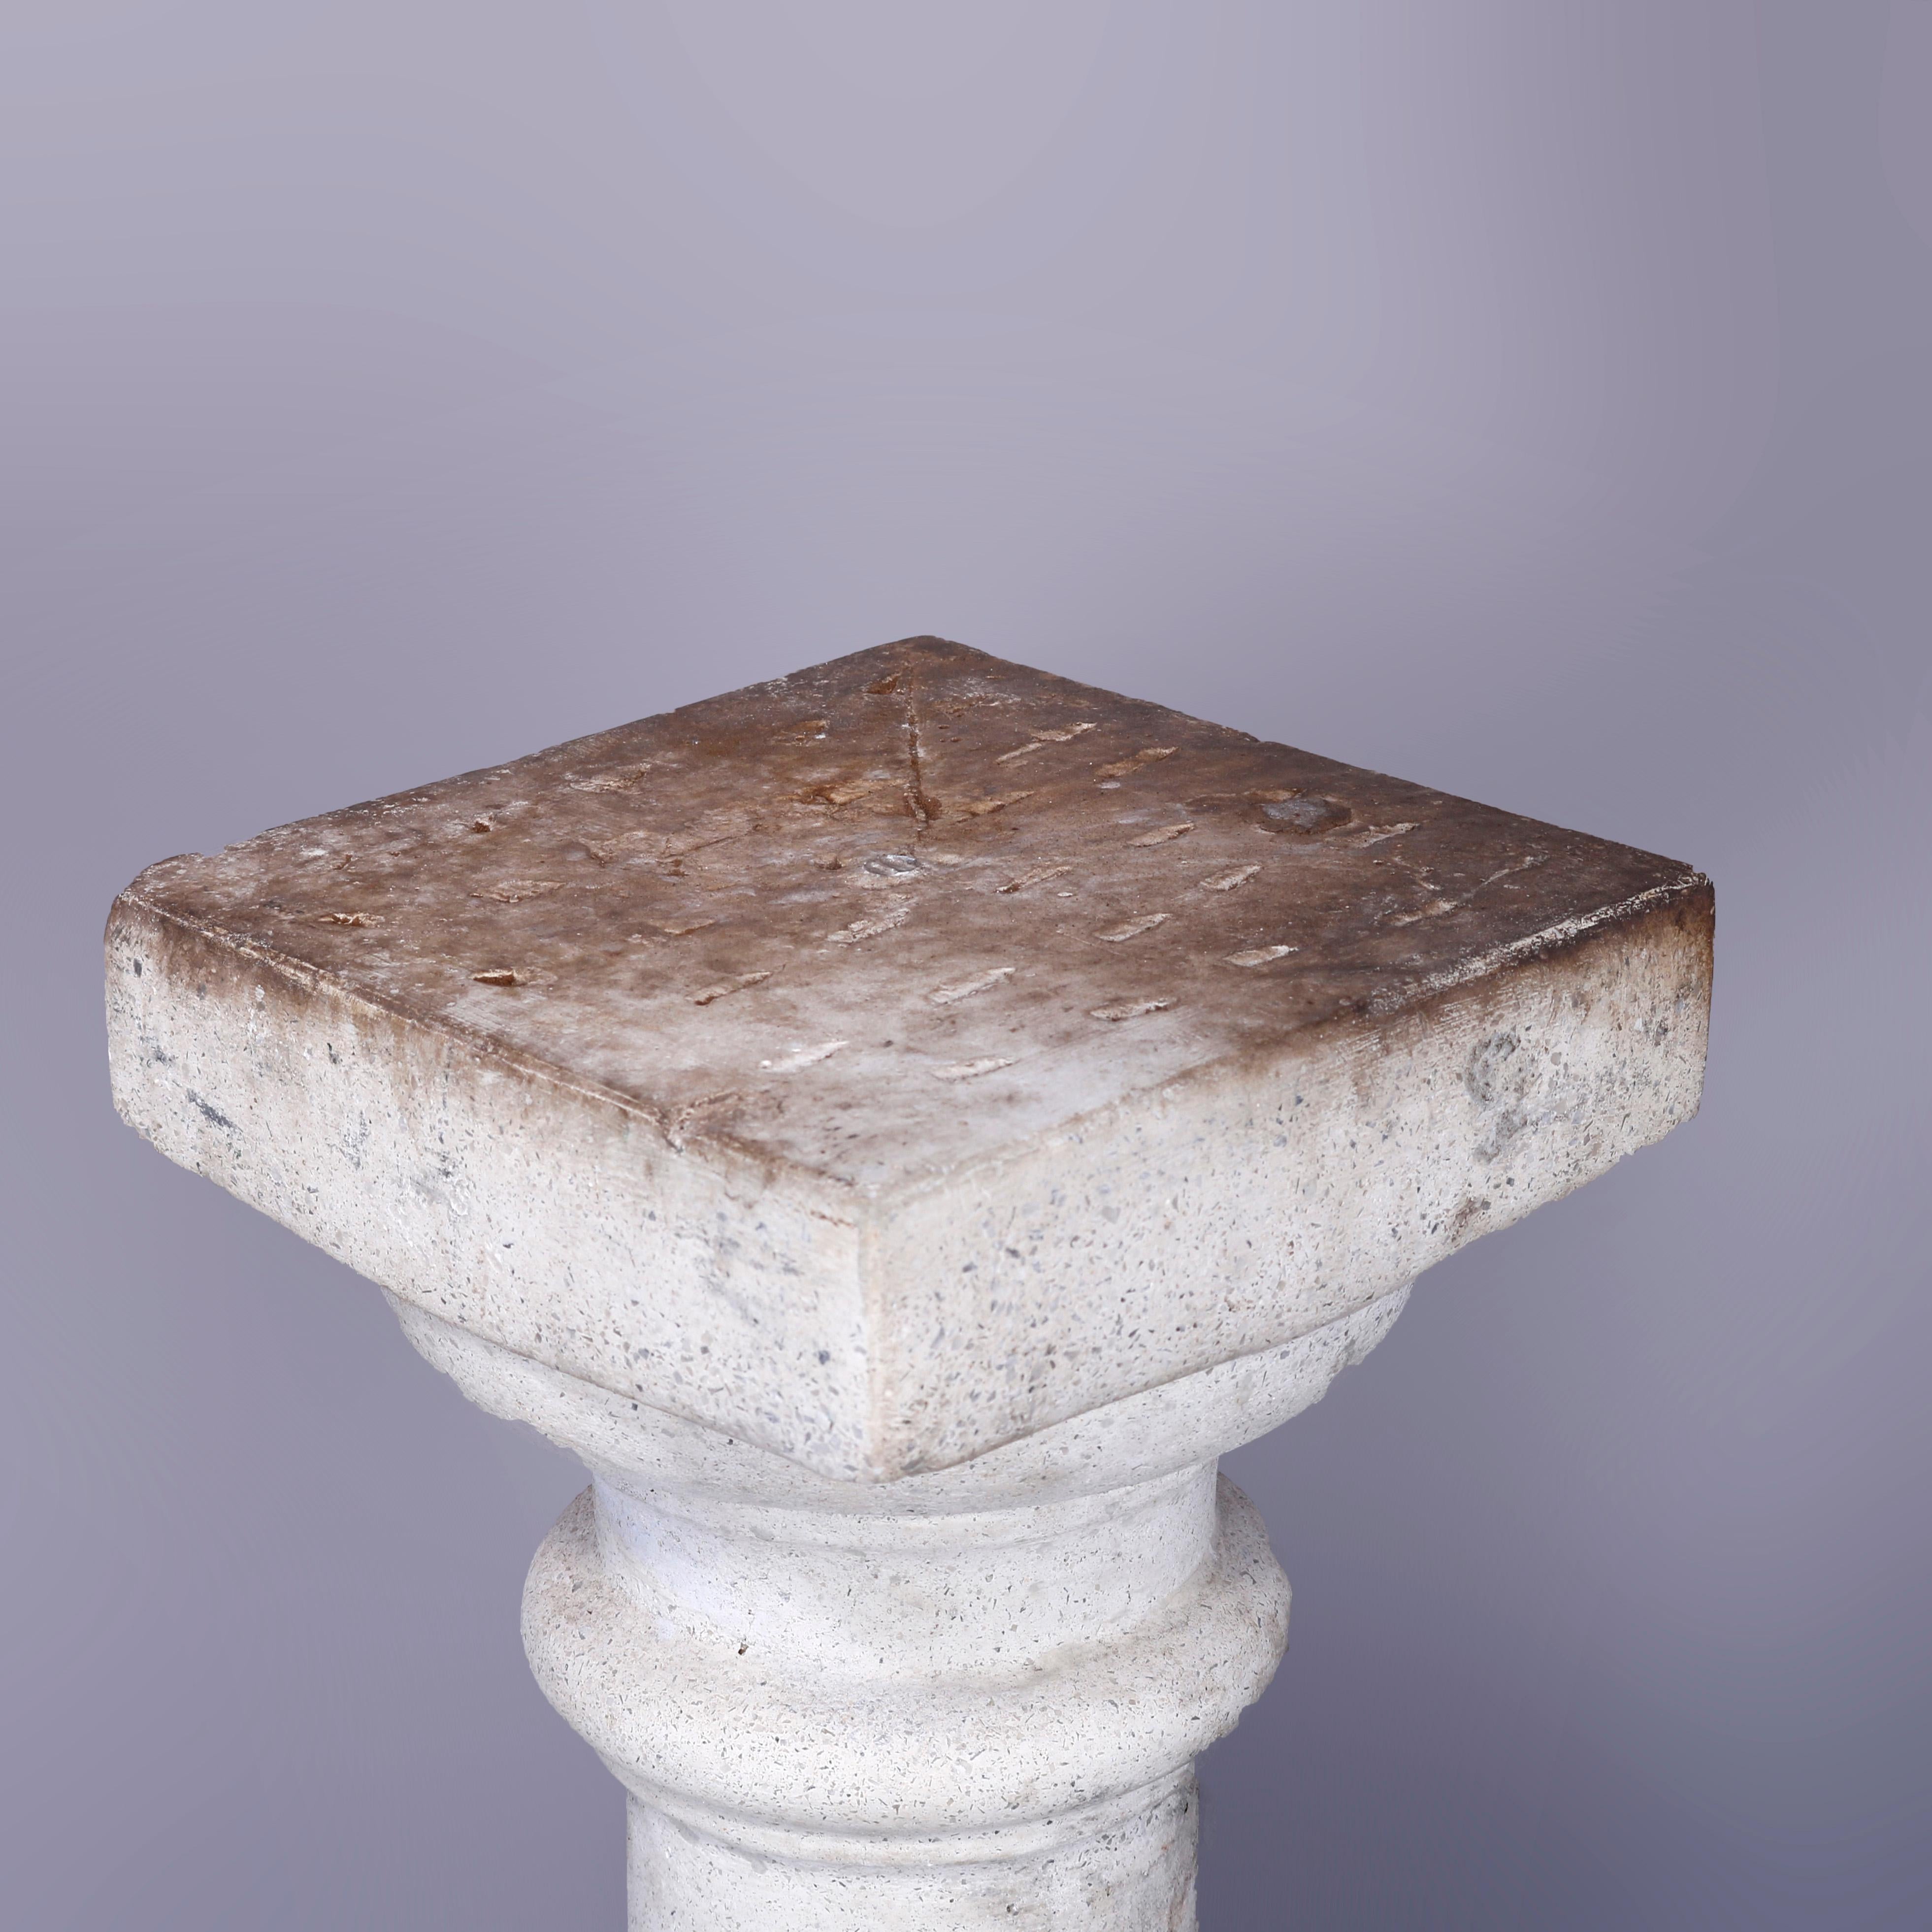 Classical Cast Hard Stone Balustrade Sculpture or Plant Display Pedestal 20th C In Good Condition For Sale In Big Flats, NY